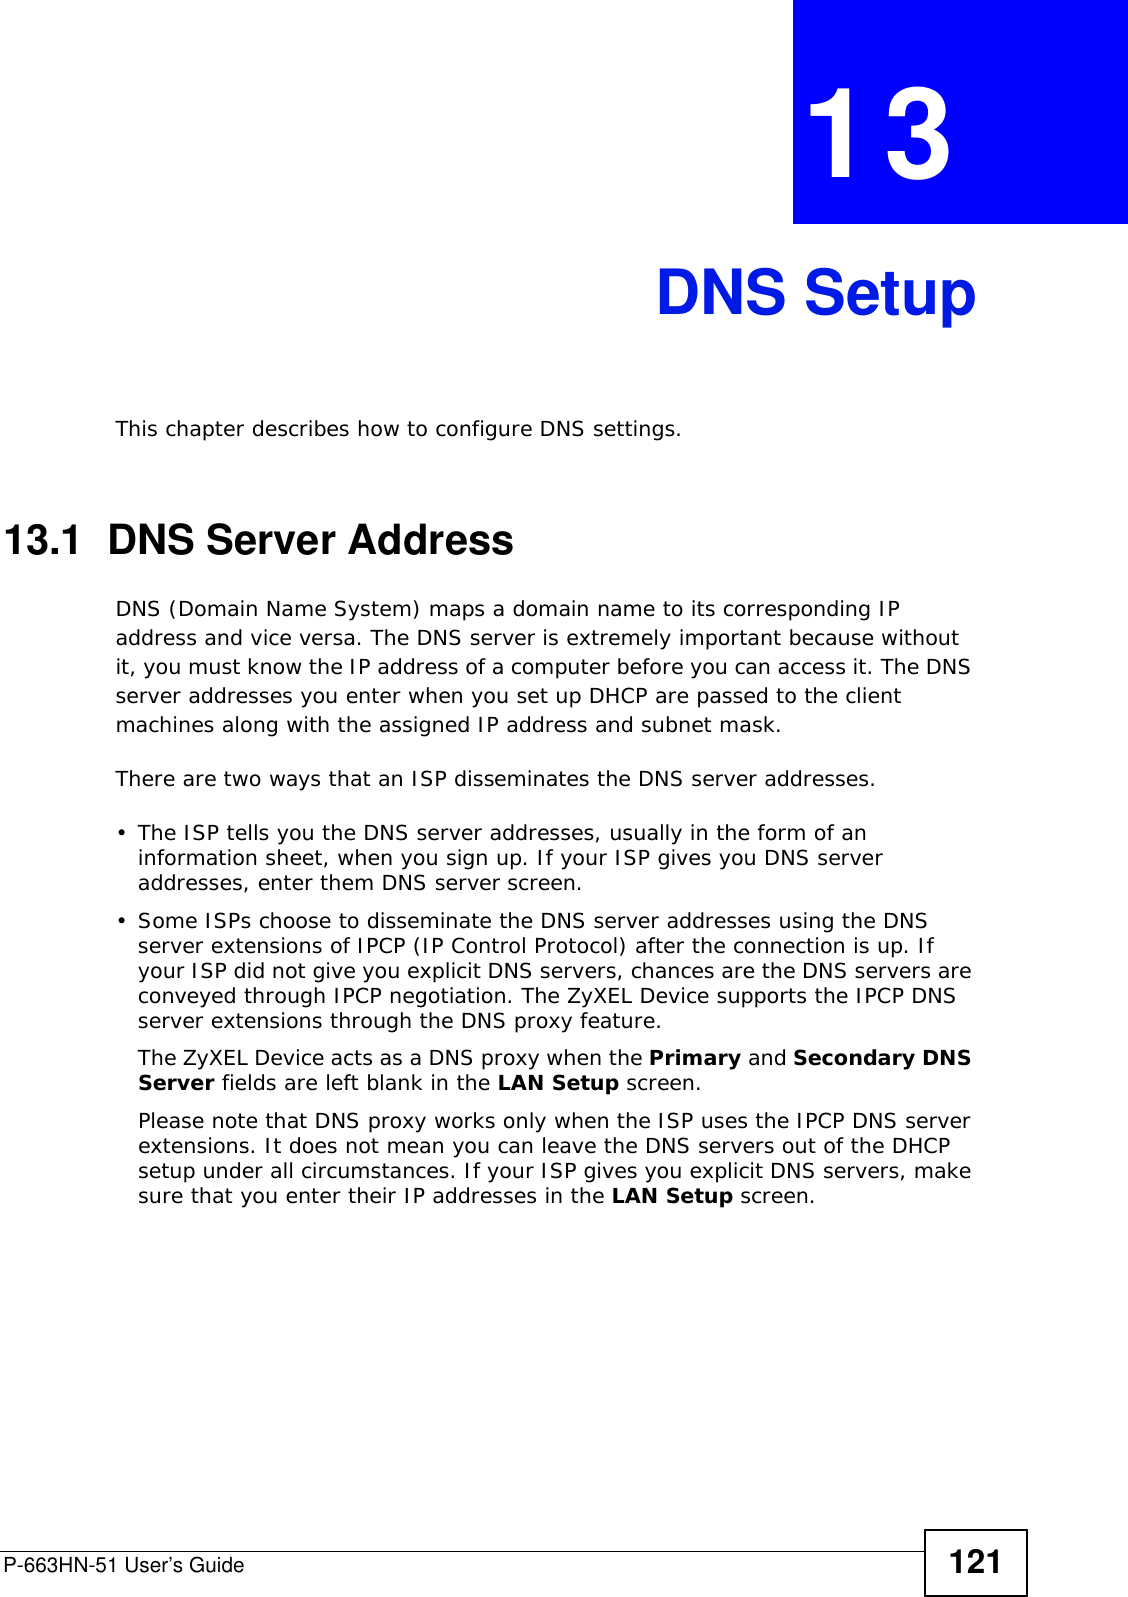 P-663HN-51 User’s Guide 121CHAPTER  13 DNS SetupThis chapter describes how to configure DNS settings.13.1  DNS Server AddressDNS (Domain Name System) maps a domain name to its corresponding IP address and vice versa. The DNS server is extremely important because without it, you must know the IP address of a computer before you can access it. The DNS server addresses you enter when you set up DHCP are passed to the client machines along with the assigned IP address and subnet mask.There are two ways that an ISP disseminates the DNS server addresses. • The ISP tells you the DNS server addresses, usually in the form of an information sheet, when you sign up. If your ISP gives you DNS server addresses, enter them DNS server screen.• Some ISPs choose to disseminate the DNS server addresses using the DNS server extensions of IPCP (IP Control Protocol) after the connection is up. If your ISP did not give you explicit DNS servers, chances are the DNS servers are conveyed through IPCP negotiation. The ZyXEL Device supports the IPCP DNS server extensions through the DNS proxy feature.The ZyXEL Device acts as a DNS proxy when the Primary and Secondary DNS Server fields are left blank in the LAN Setup screen.Please note that DNS proxy works only when the ISP uses the IPCP DNS server extensions. It does not mean you can leave the DNS servers out of the DHCP setup under all circumstances. If your ISP gives you explicit DNS servers, make sure that you enter their IP addresses in the LAN Setup screen. 